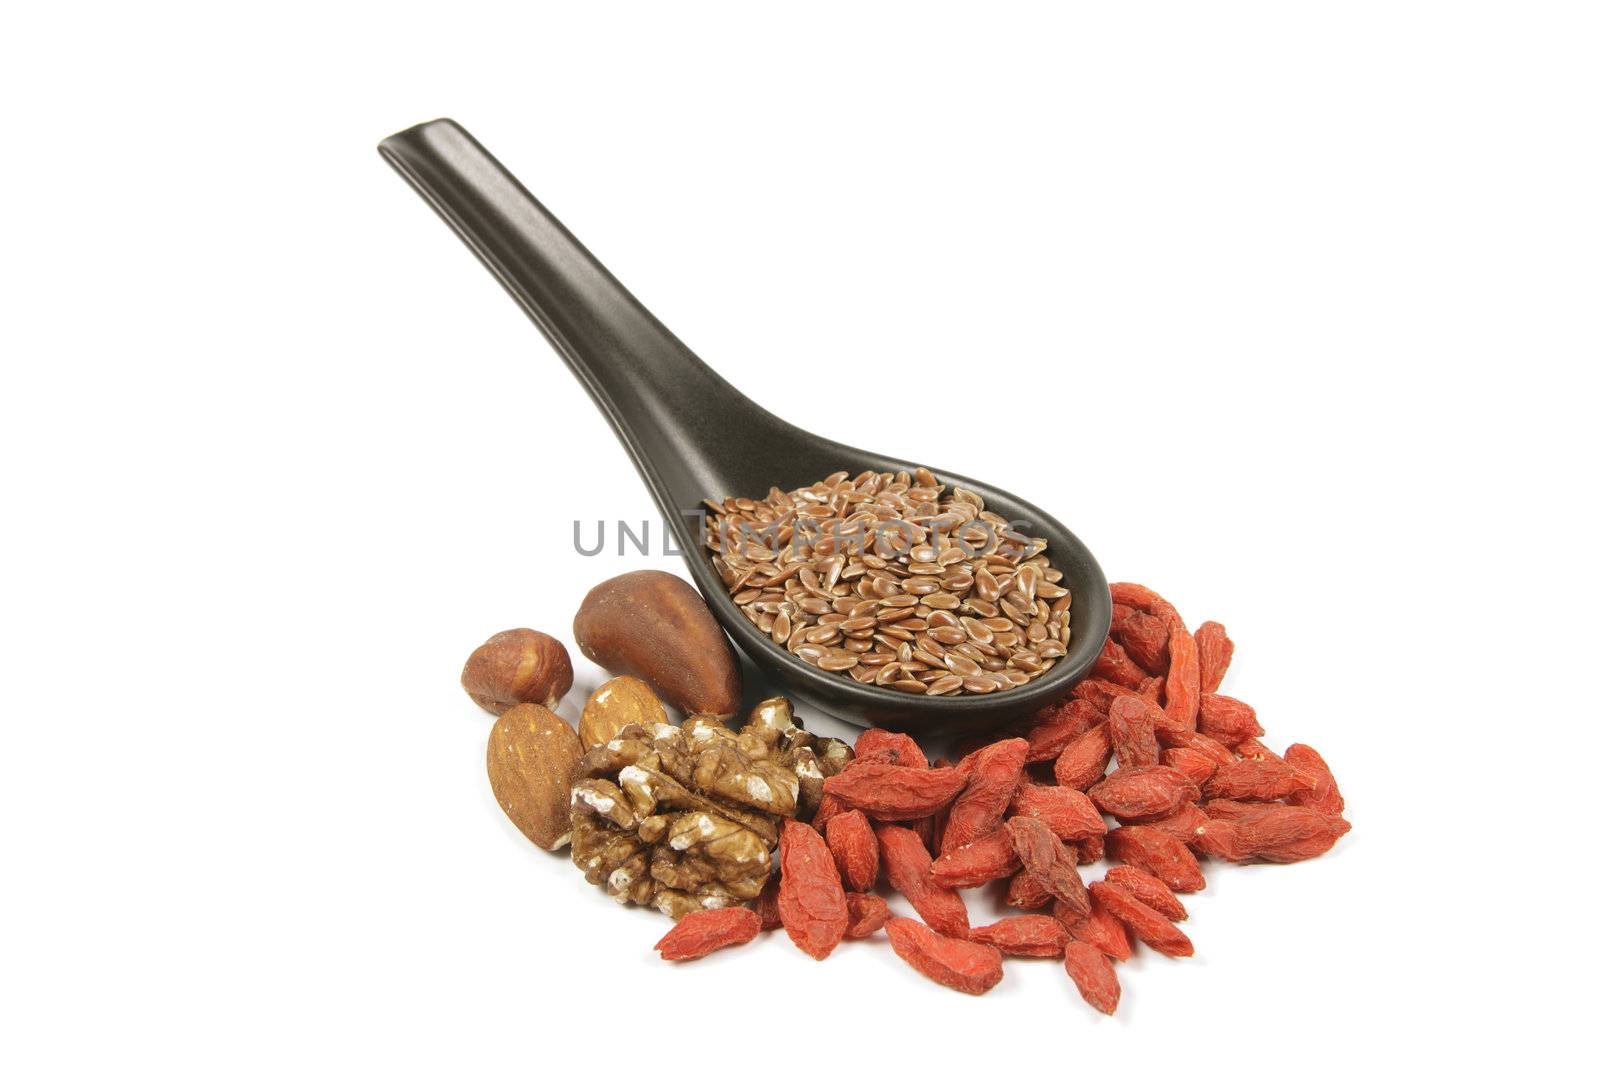 Brown linseed seeds on a small black spoon with mixed nuts and goji berries on a reflective white background